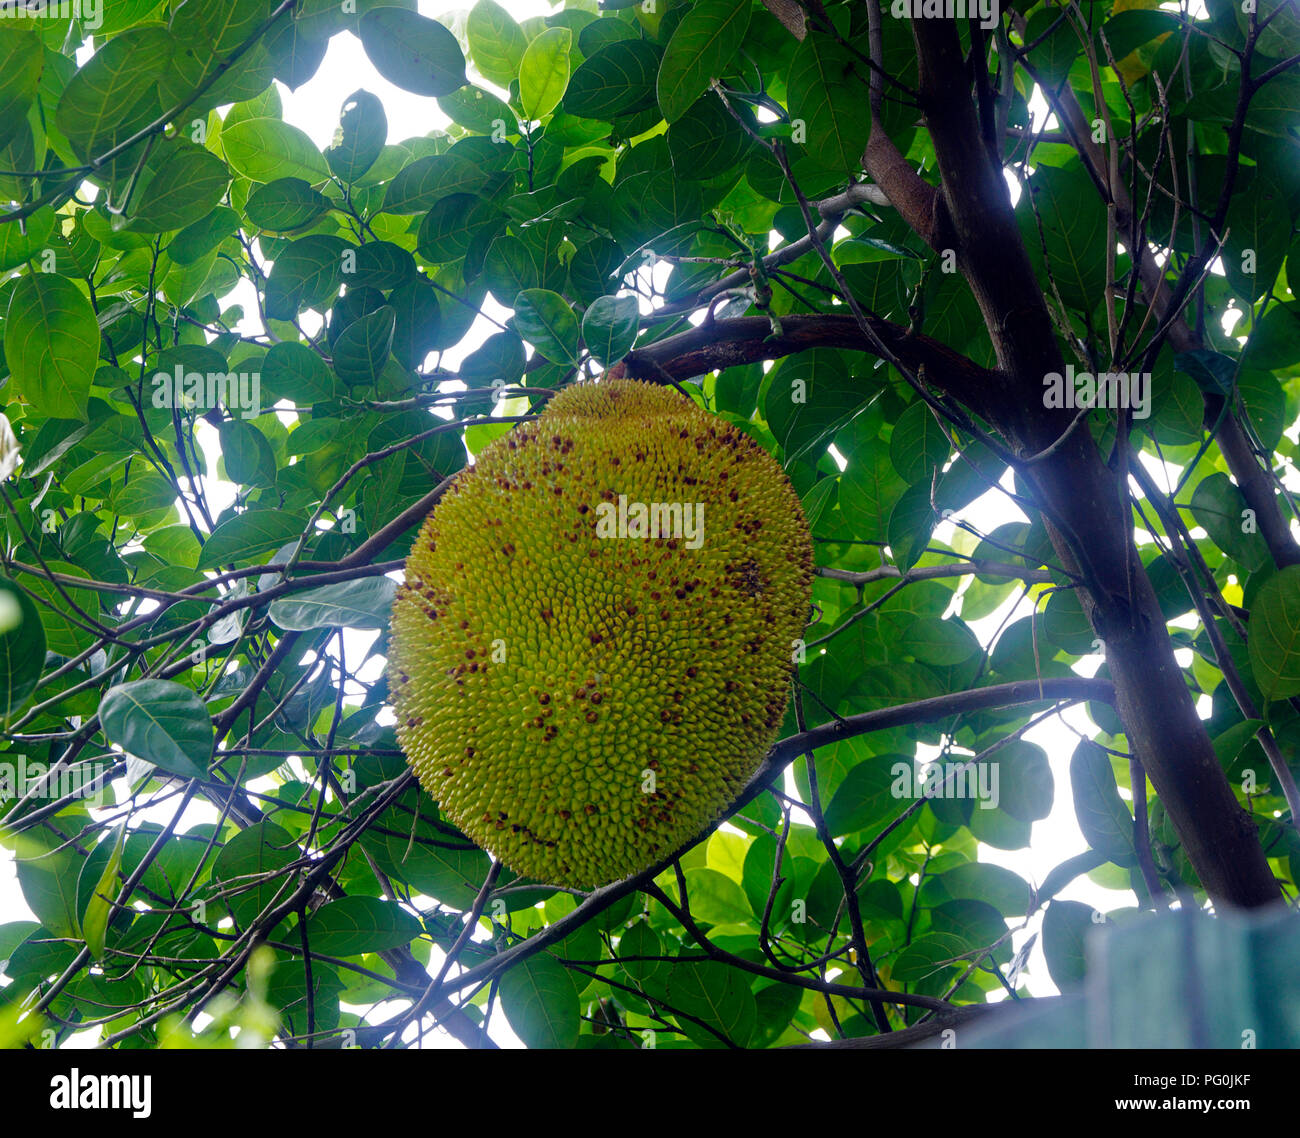 Durian tree, Fresh durian fruit on tree, Durians are the king of fruits, Tropical of asian fruit. Stock Photo